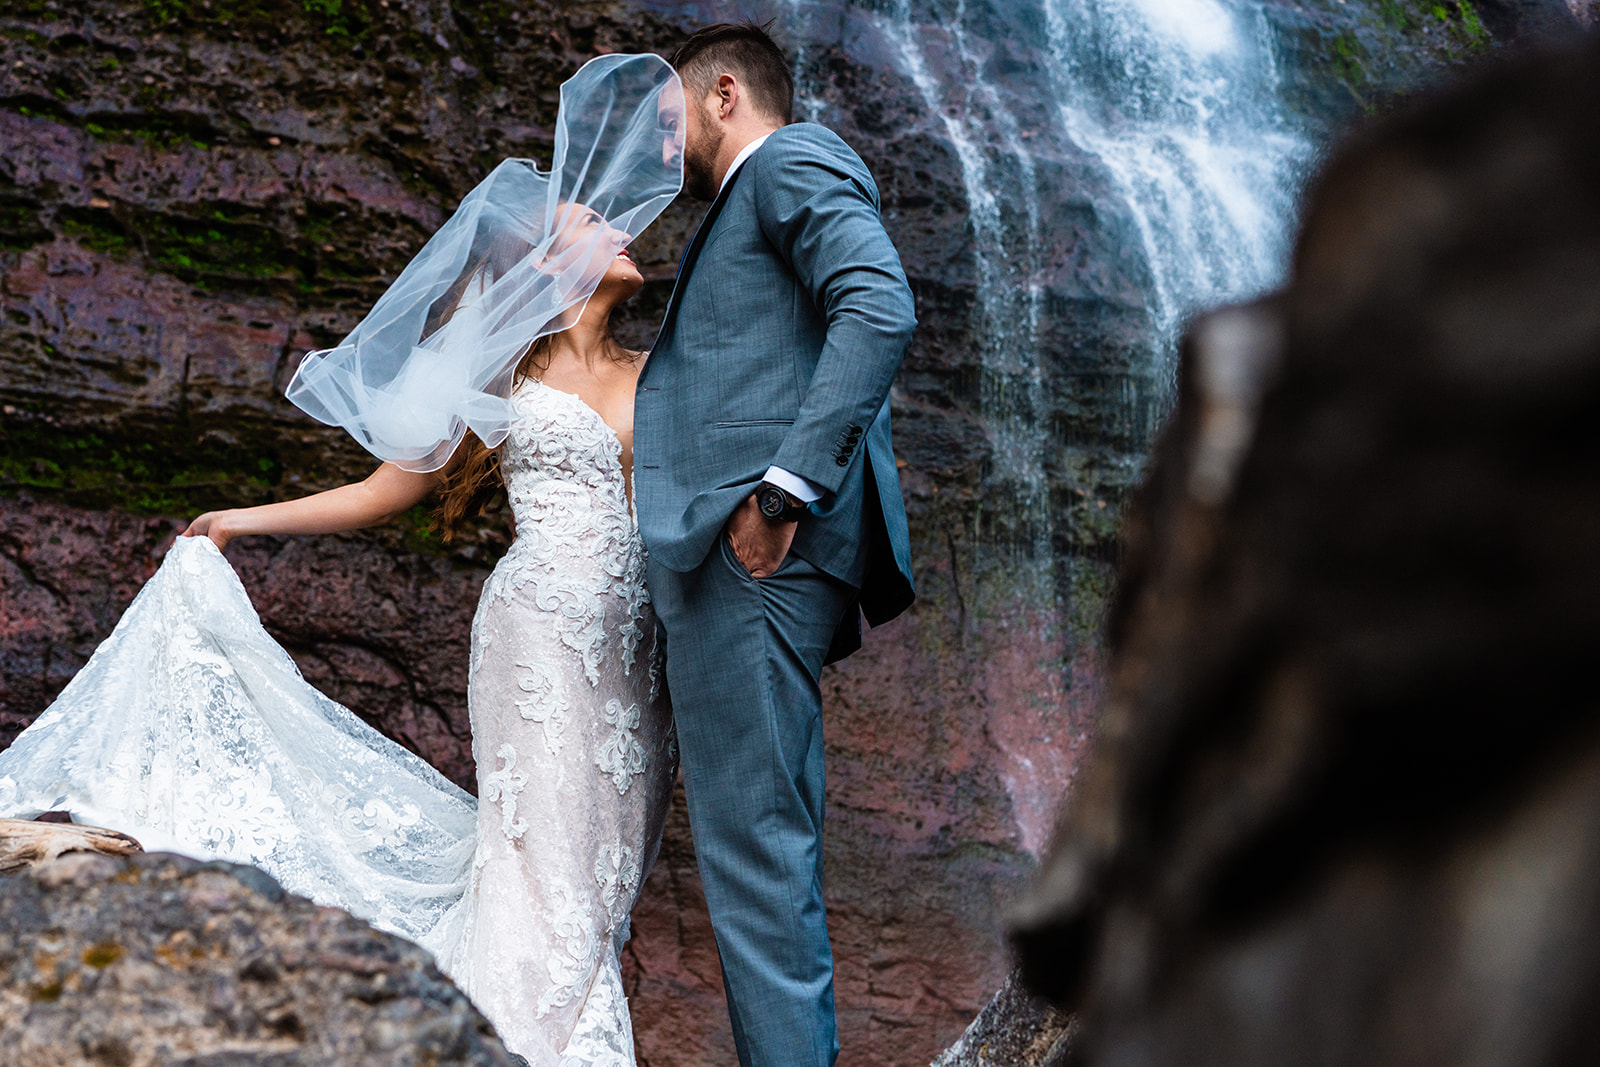 Adventure Bridal Veil Falls elopement day with dreamy backdrops and mountain views in Colorado